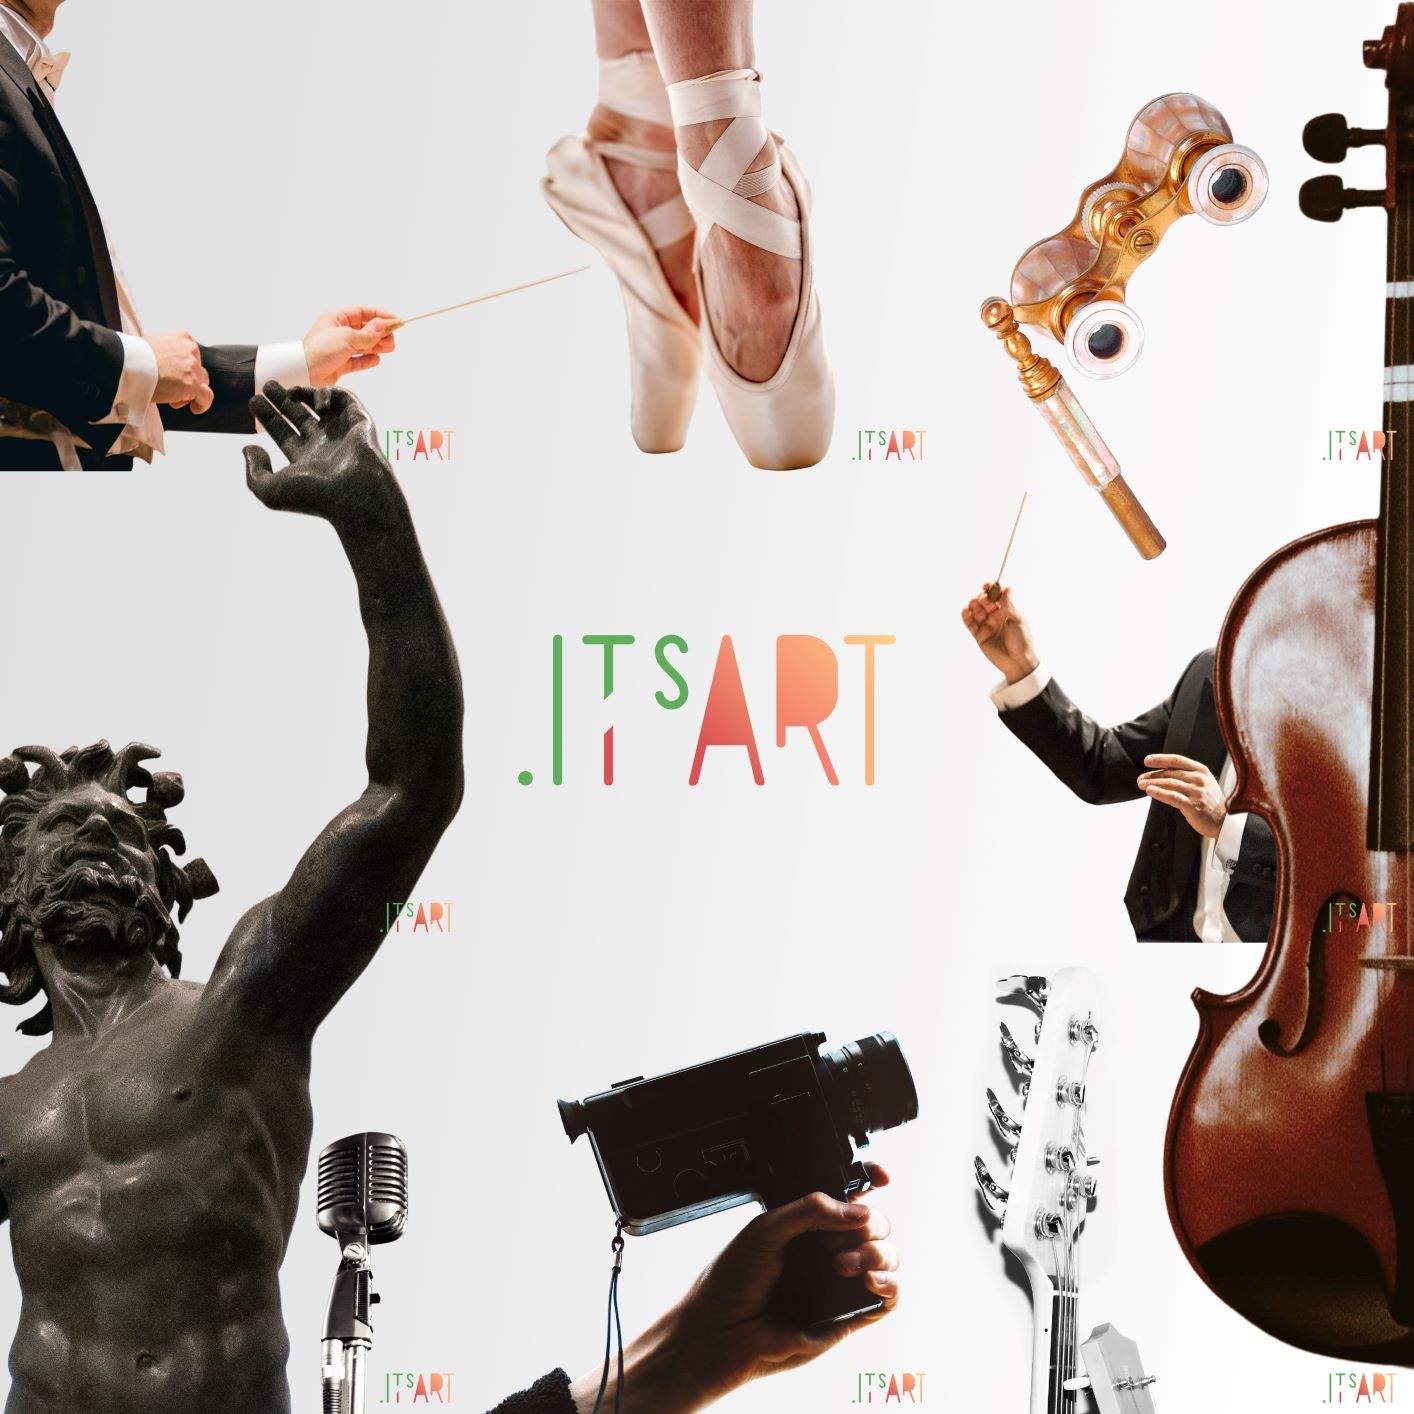 ITsART (the Netflix of culture) will be launched on May 31. Here's what will be there 